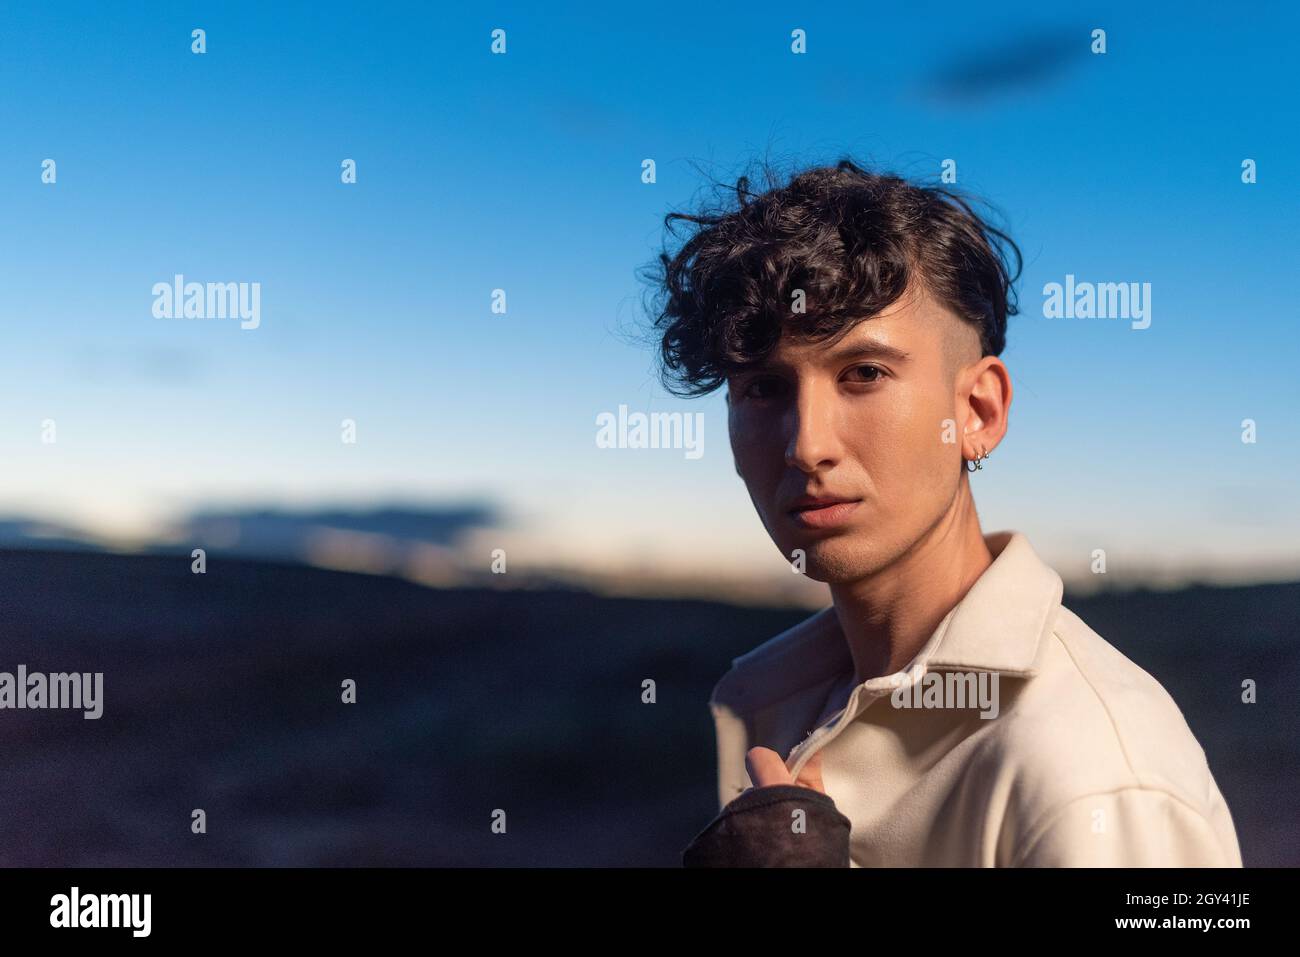 Non binary person facing the camera with relaxed expression Stock Photo